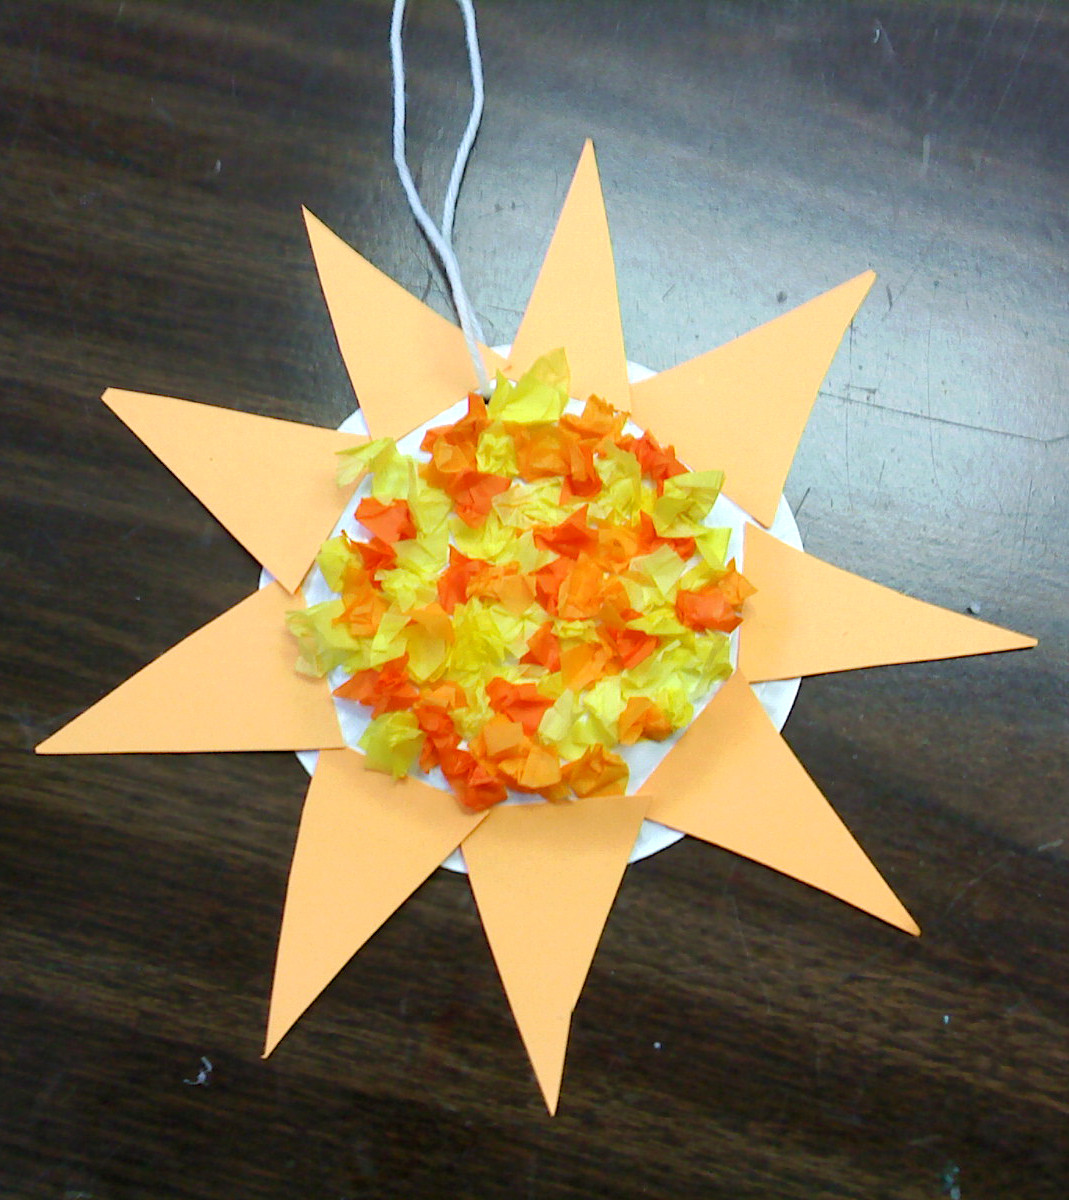 Arts And Craft Ideas For Preschoolers
 Arts and Crafts